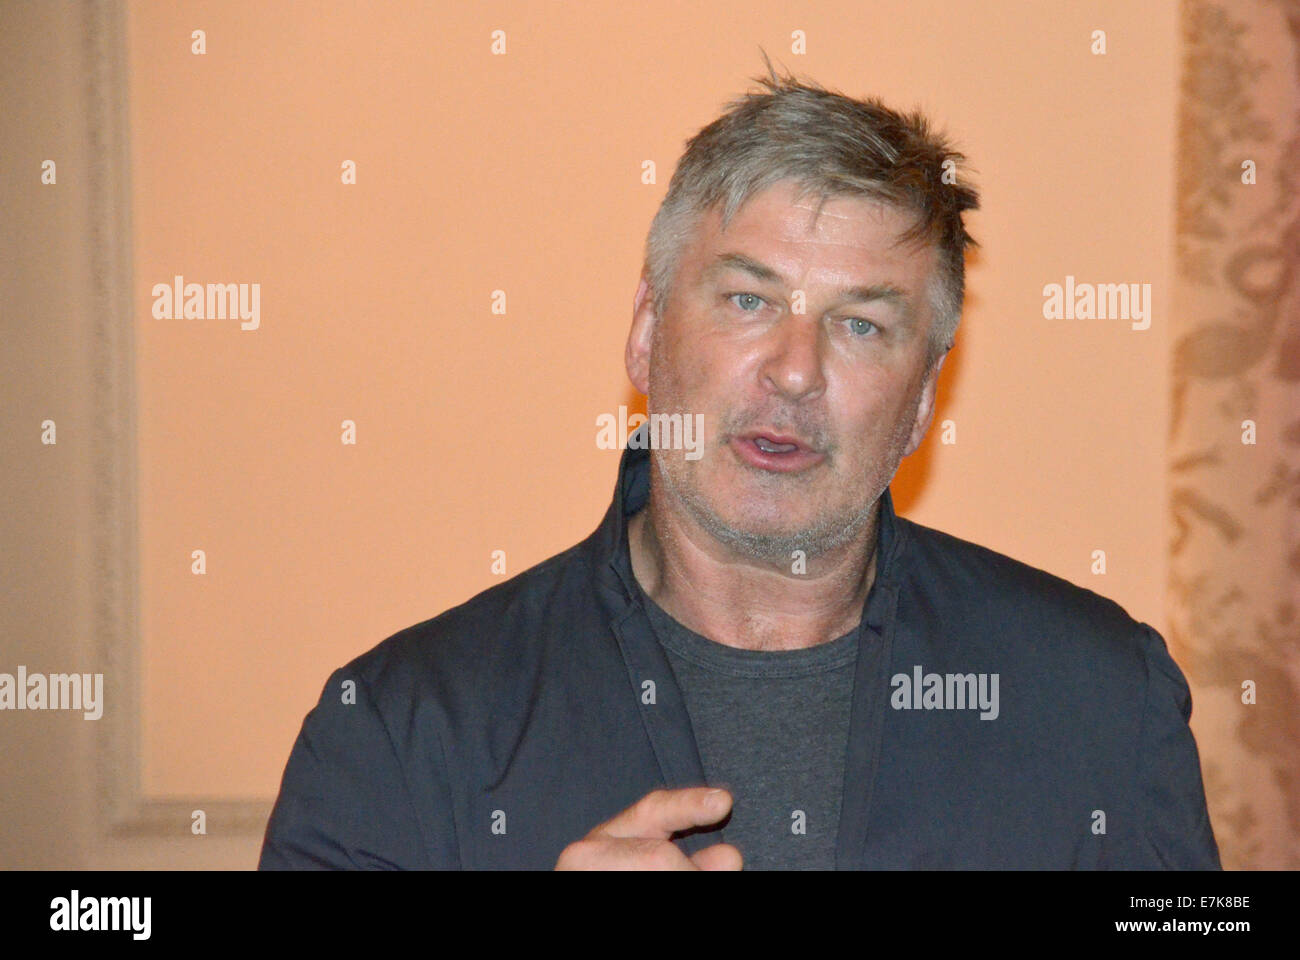 New York, USA. 19th Sep, 2014. US actor Alec Baldwin speaks during an interview in New York, USA, 19 September 2014. Baldwin plays a greedy manager in the TV show '30 Rock'. In his private life he is an advocate for clean energy. In an interview with dpa he talked about why he promotes renewable energy and why he adores Germany. Photo: Chris Melzer/dpa/Alamy Live News Stock Photo